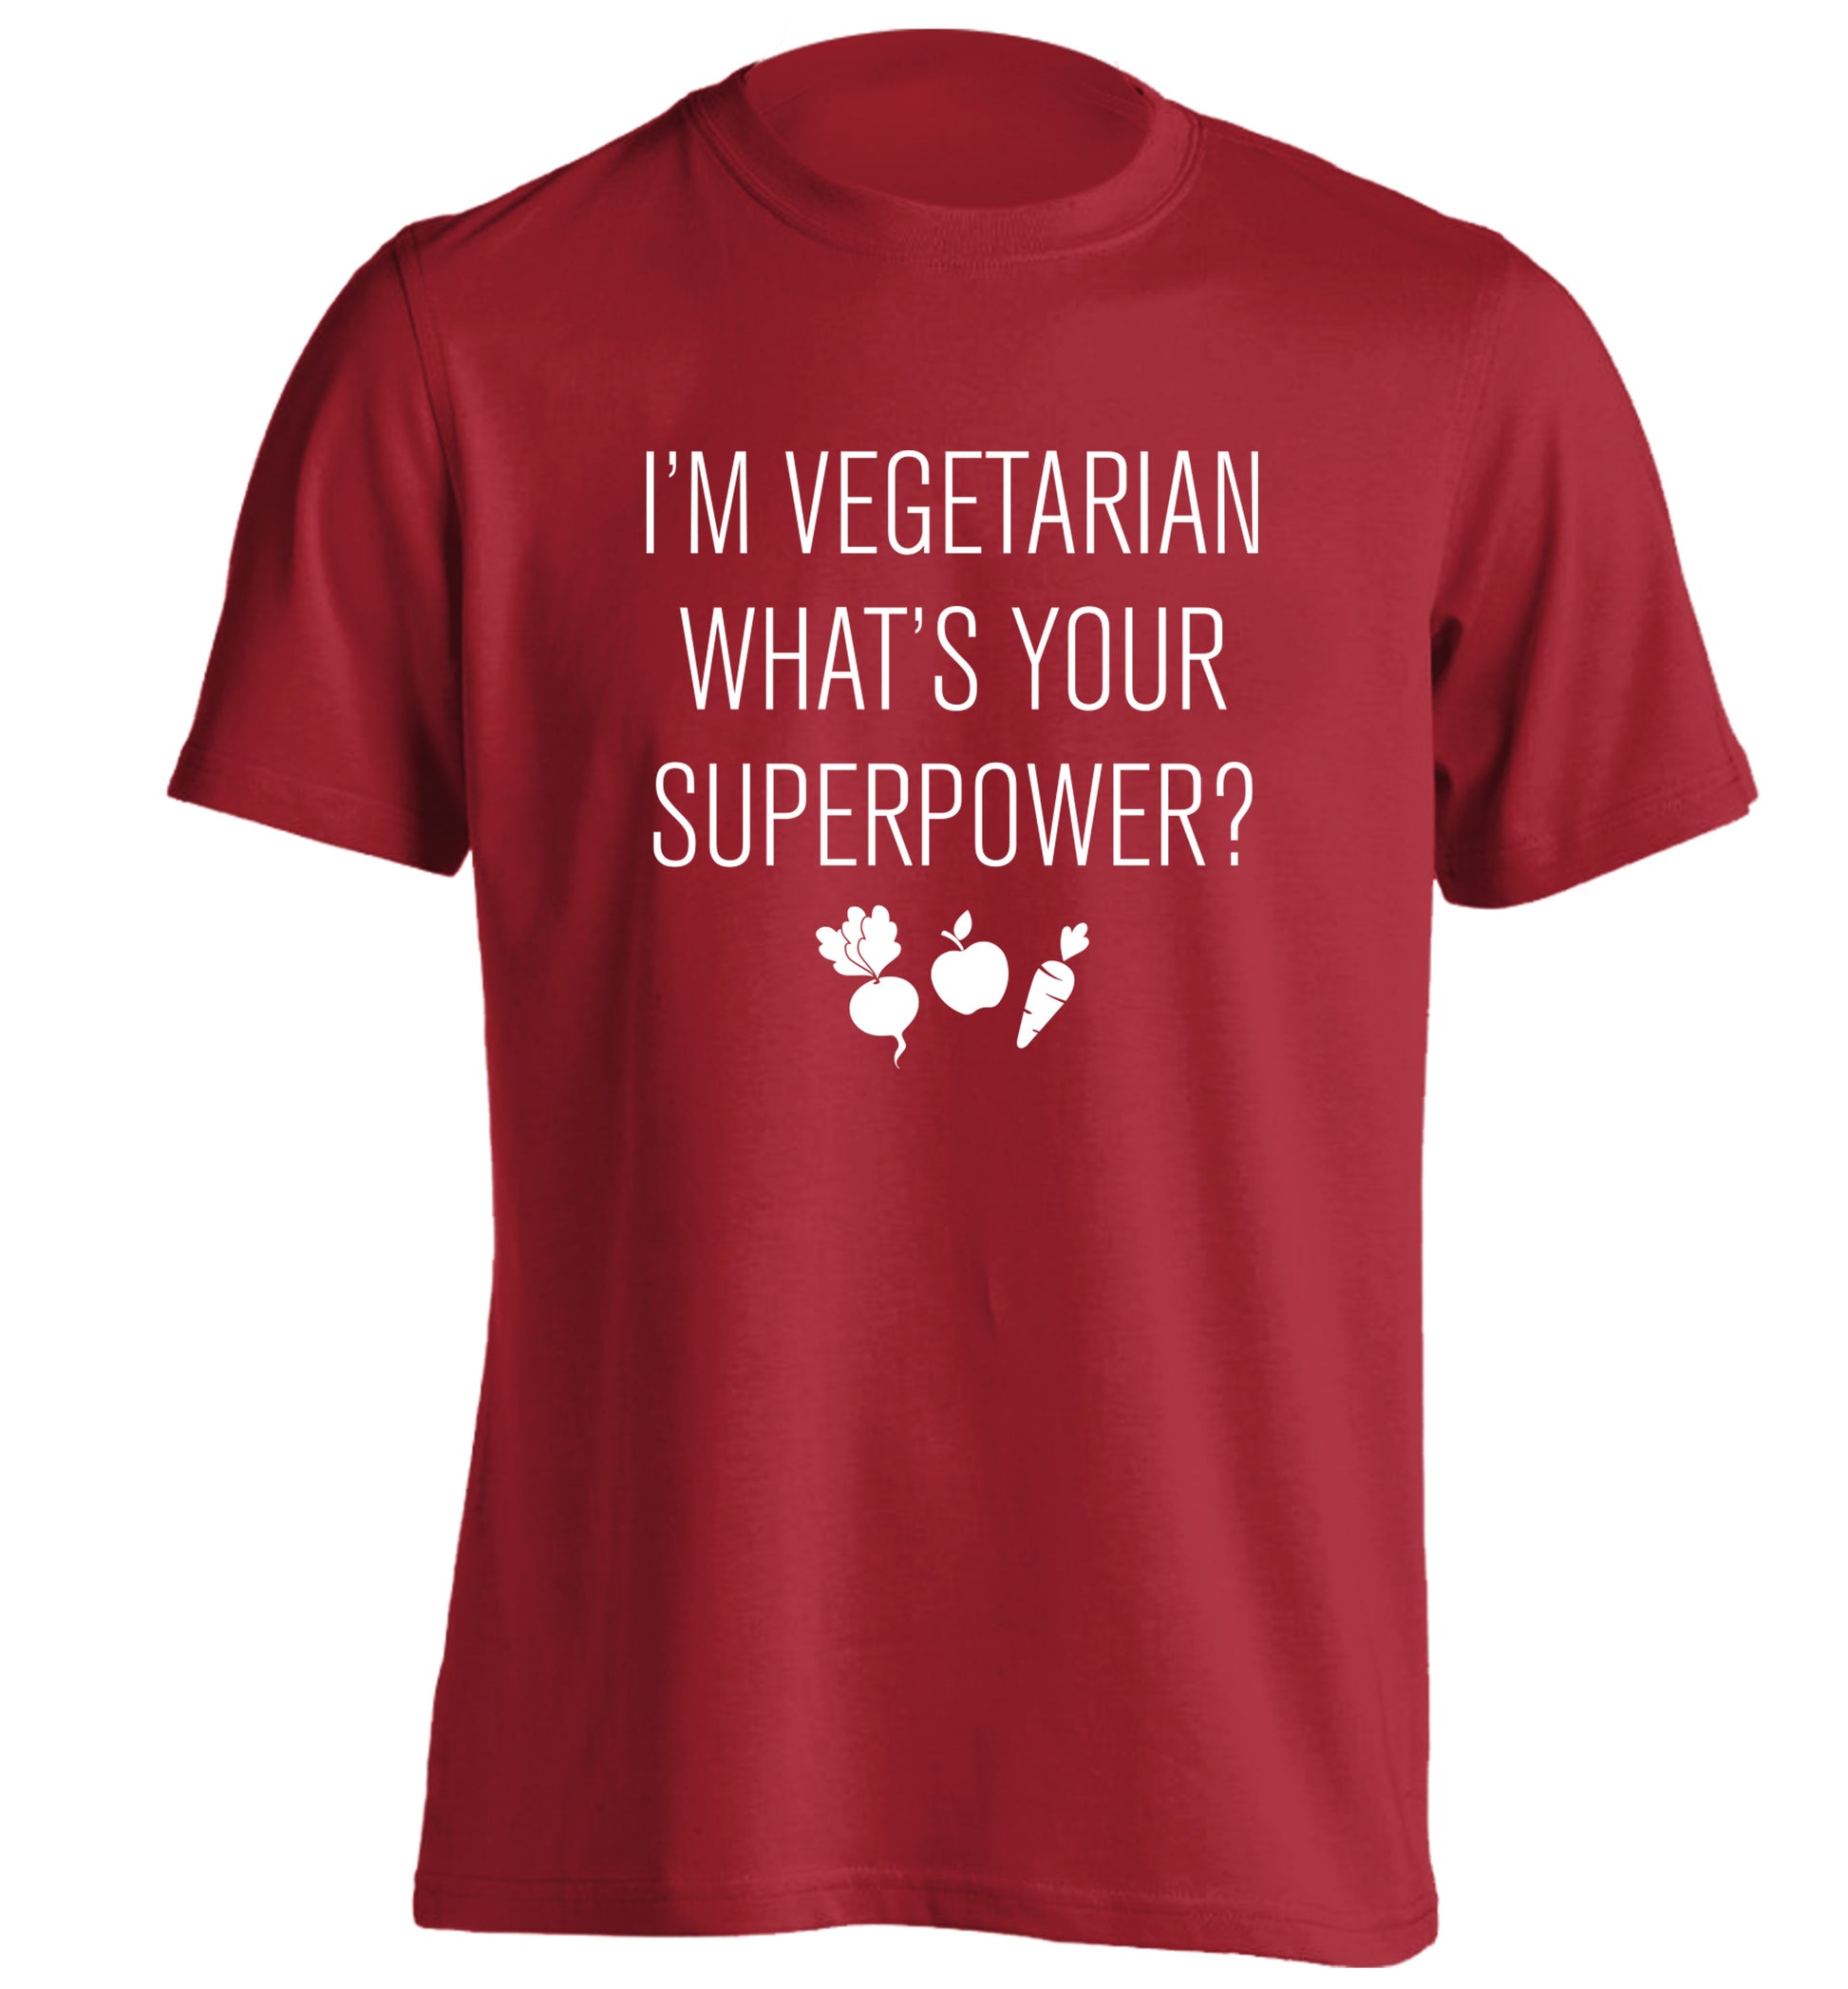 I'm vegetarian what's your superpower? adults unisex red Tshirt 2XL